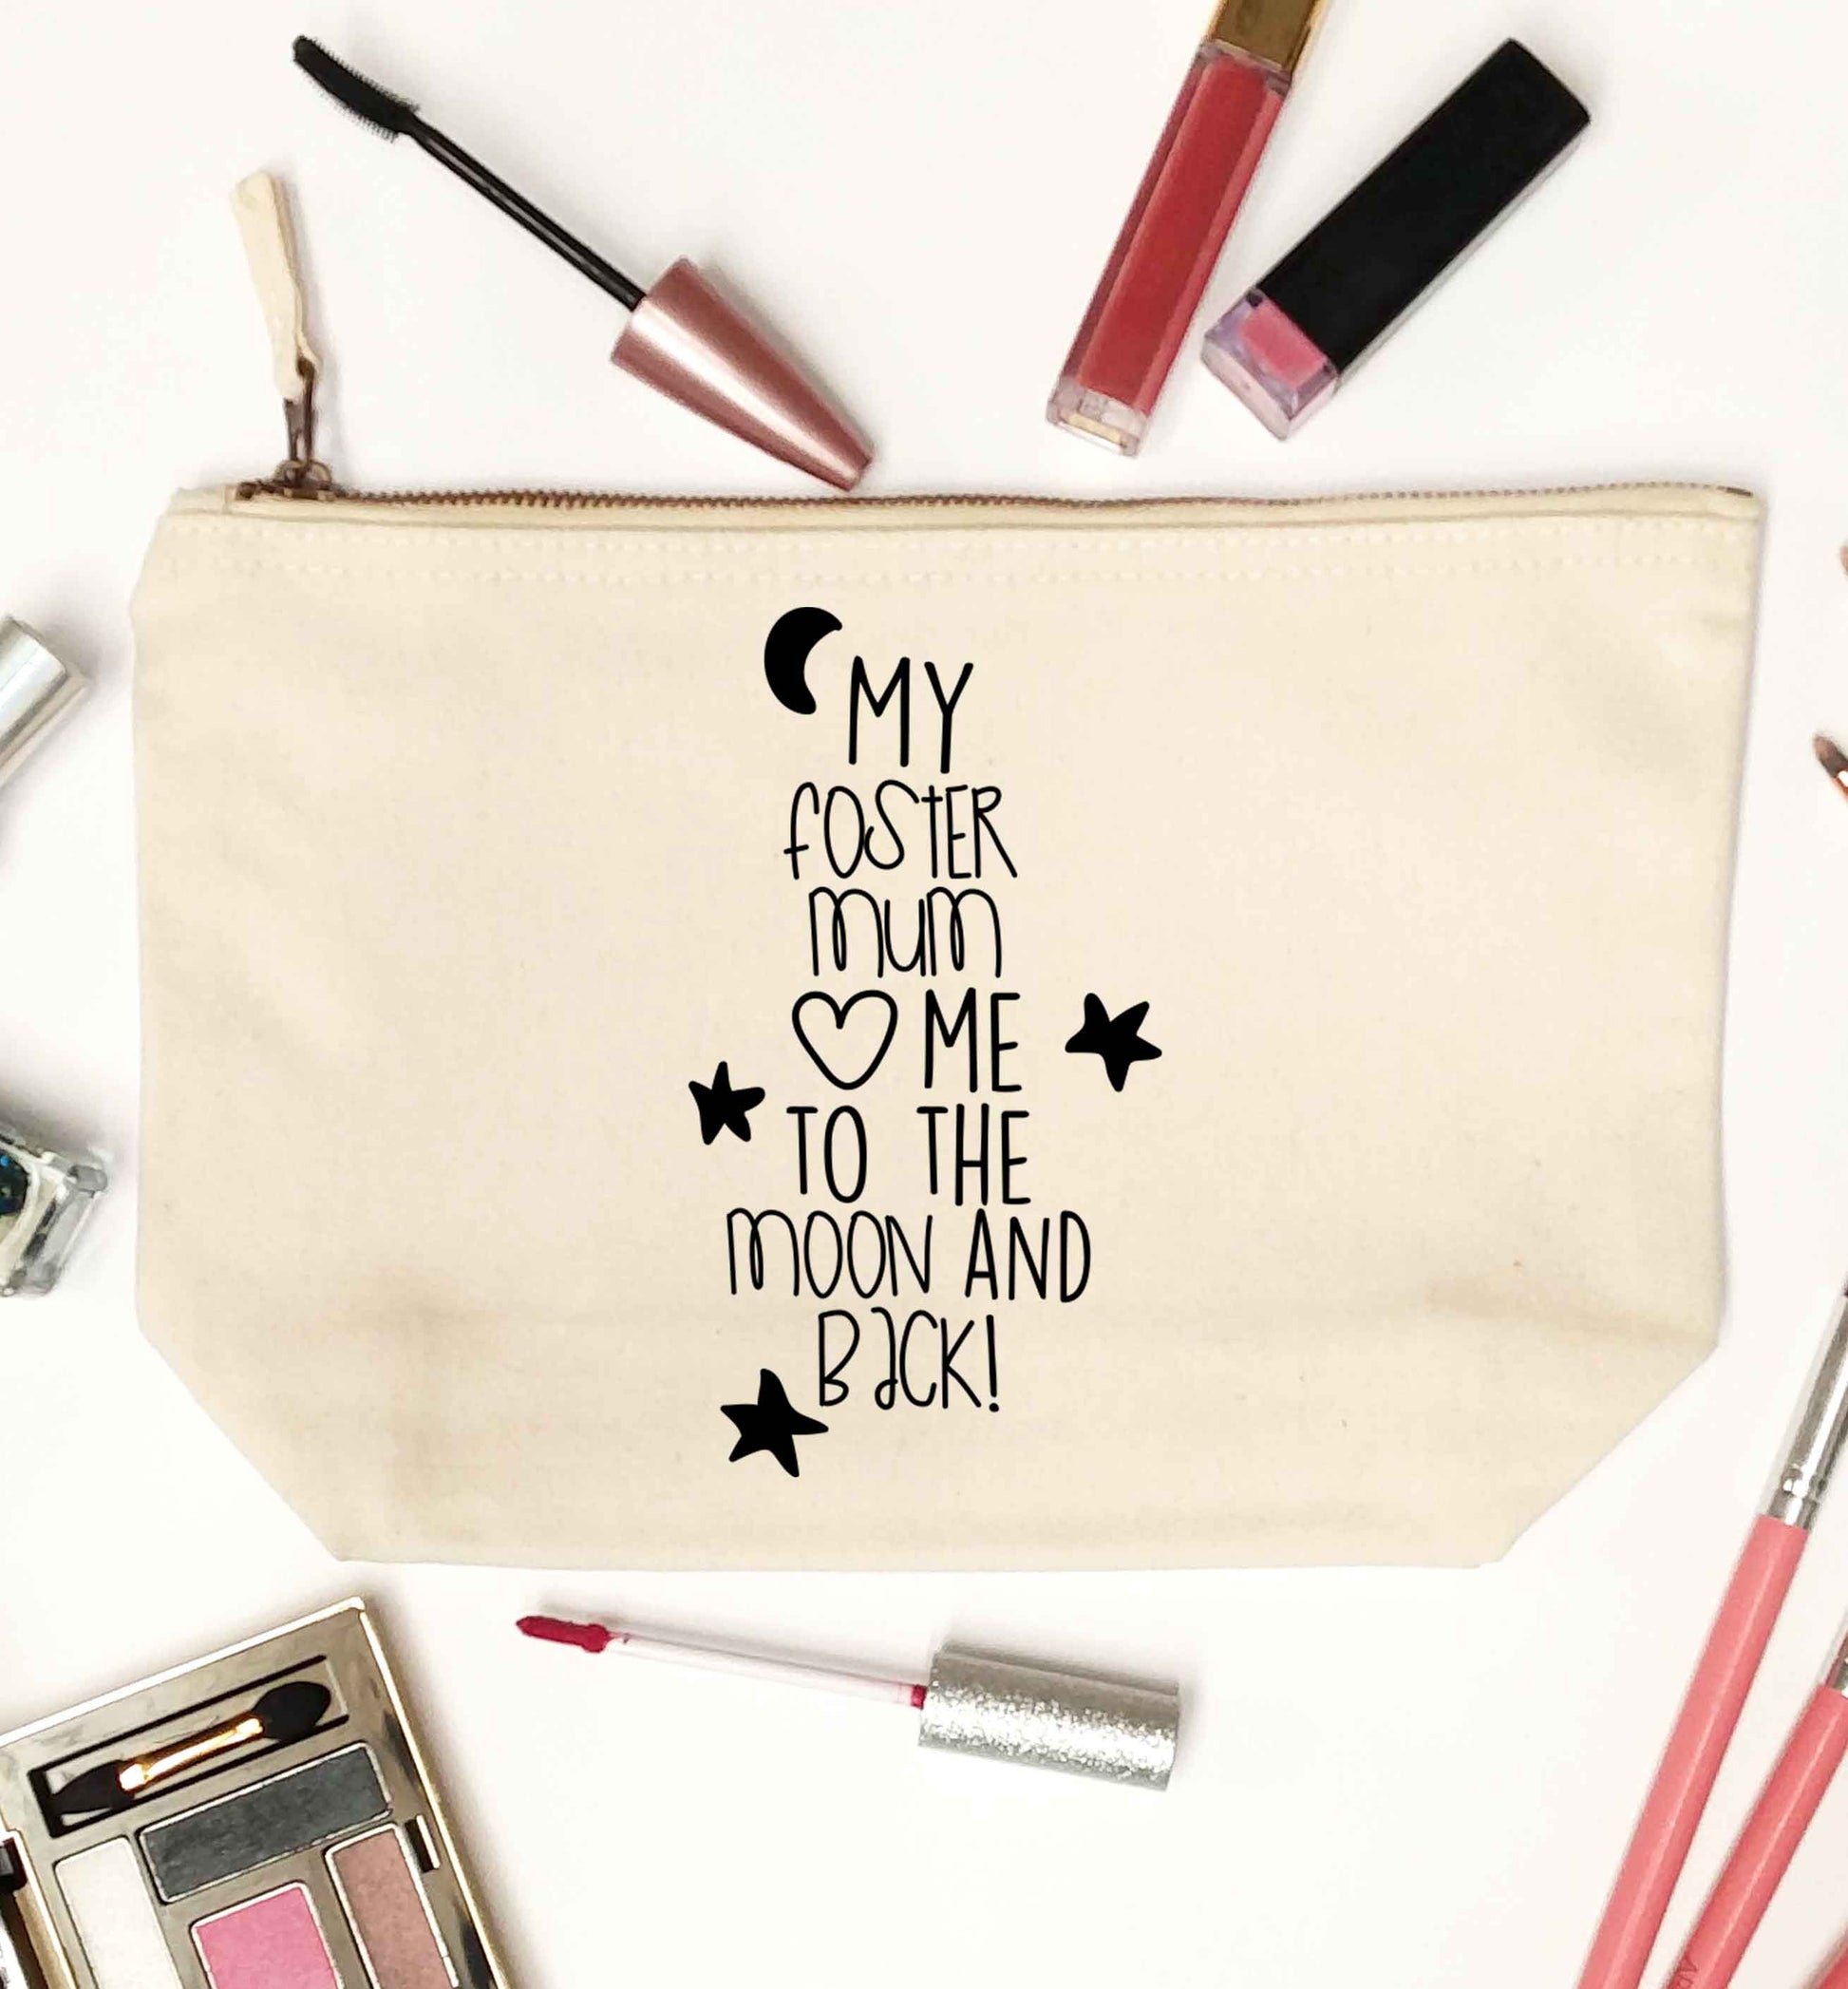 My foster mum loves me to the moon and back natural makeup bag